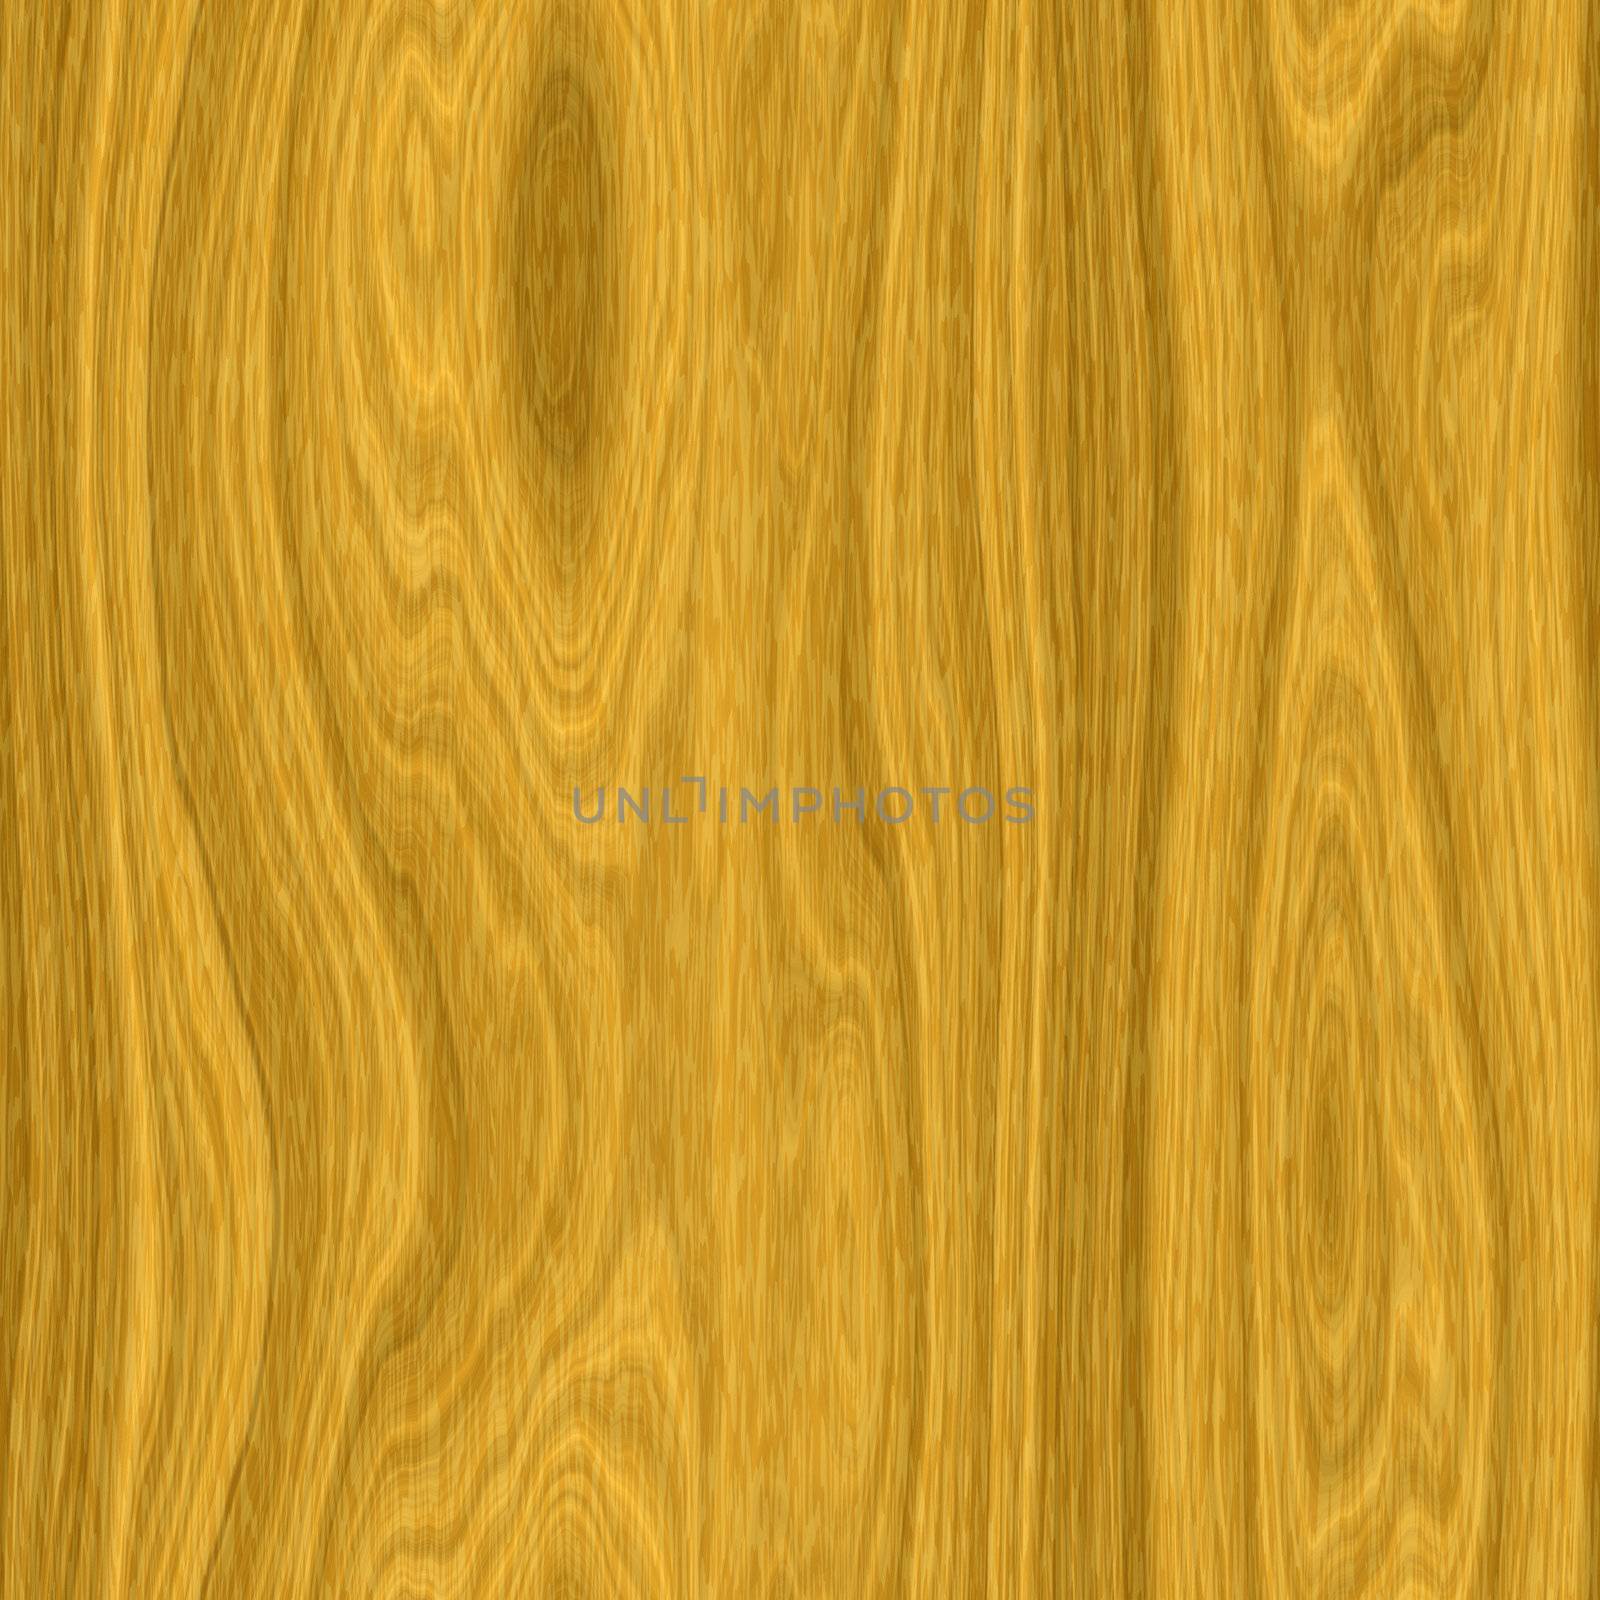 knotted wood veneer, will tile seamlessly as a pattern